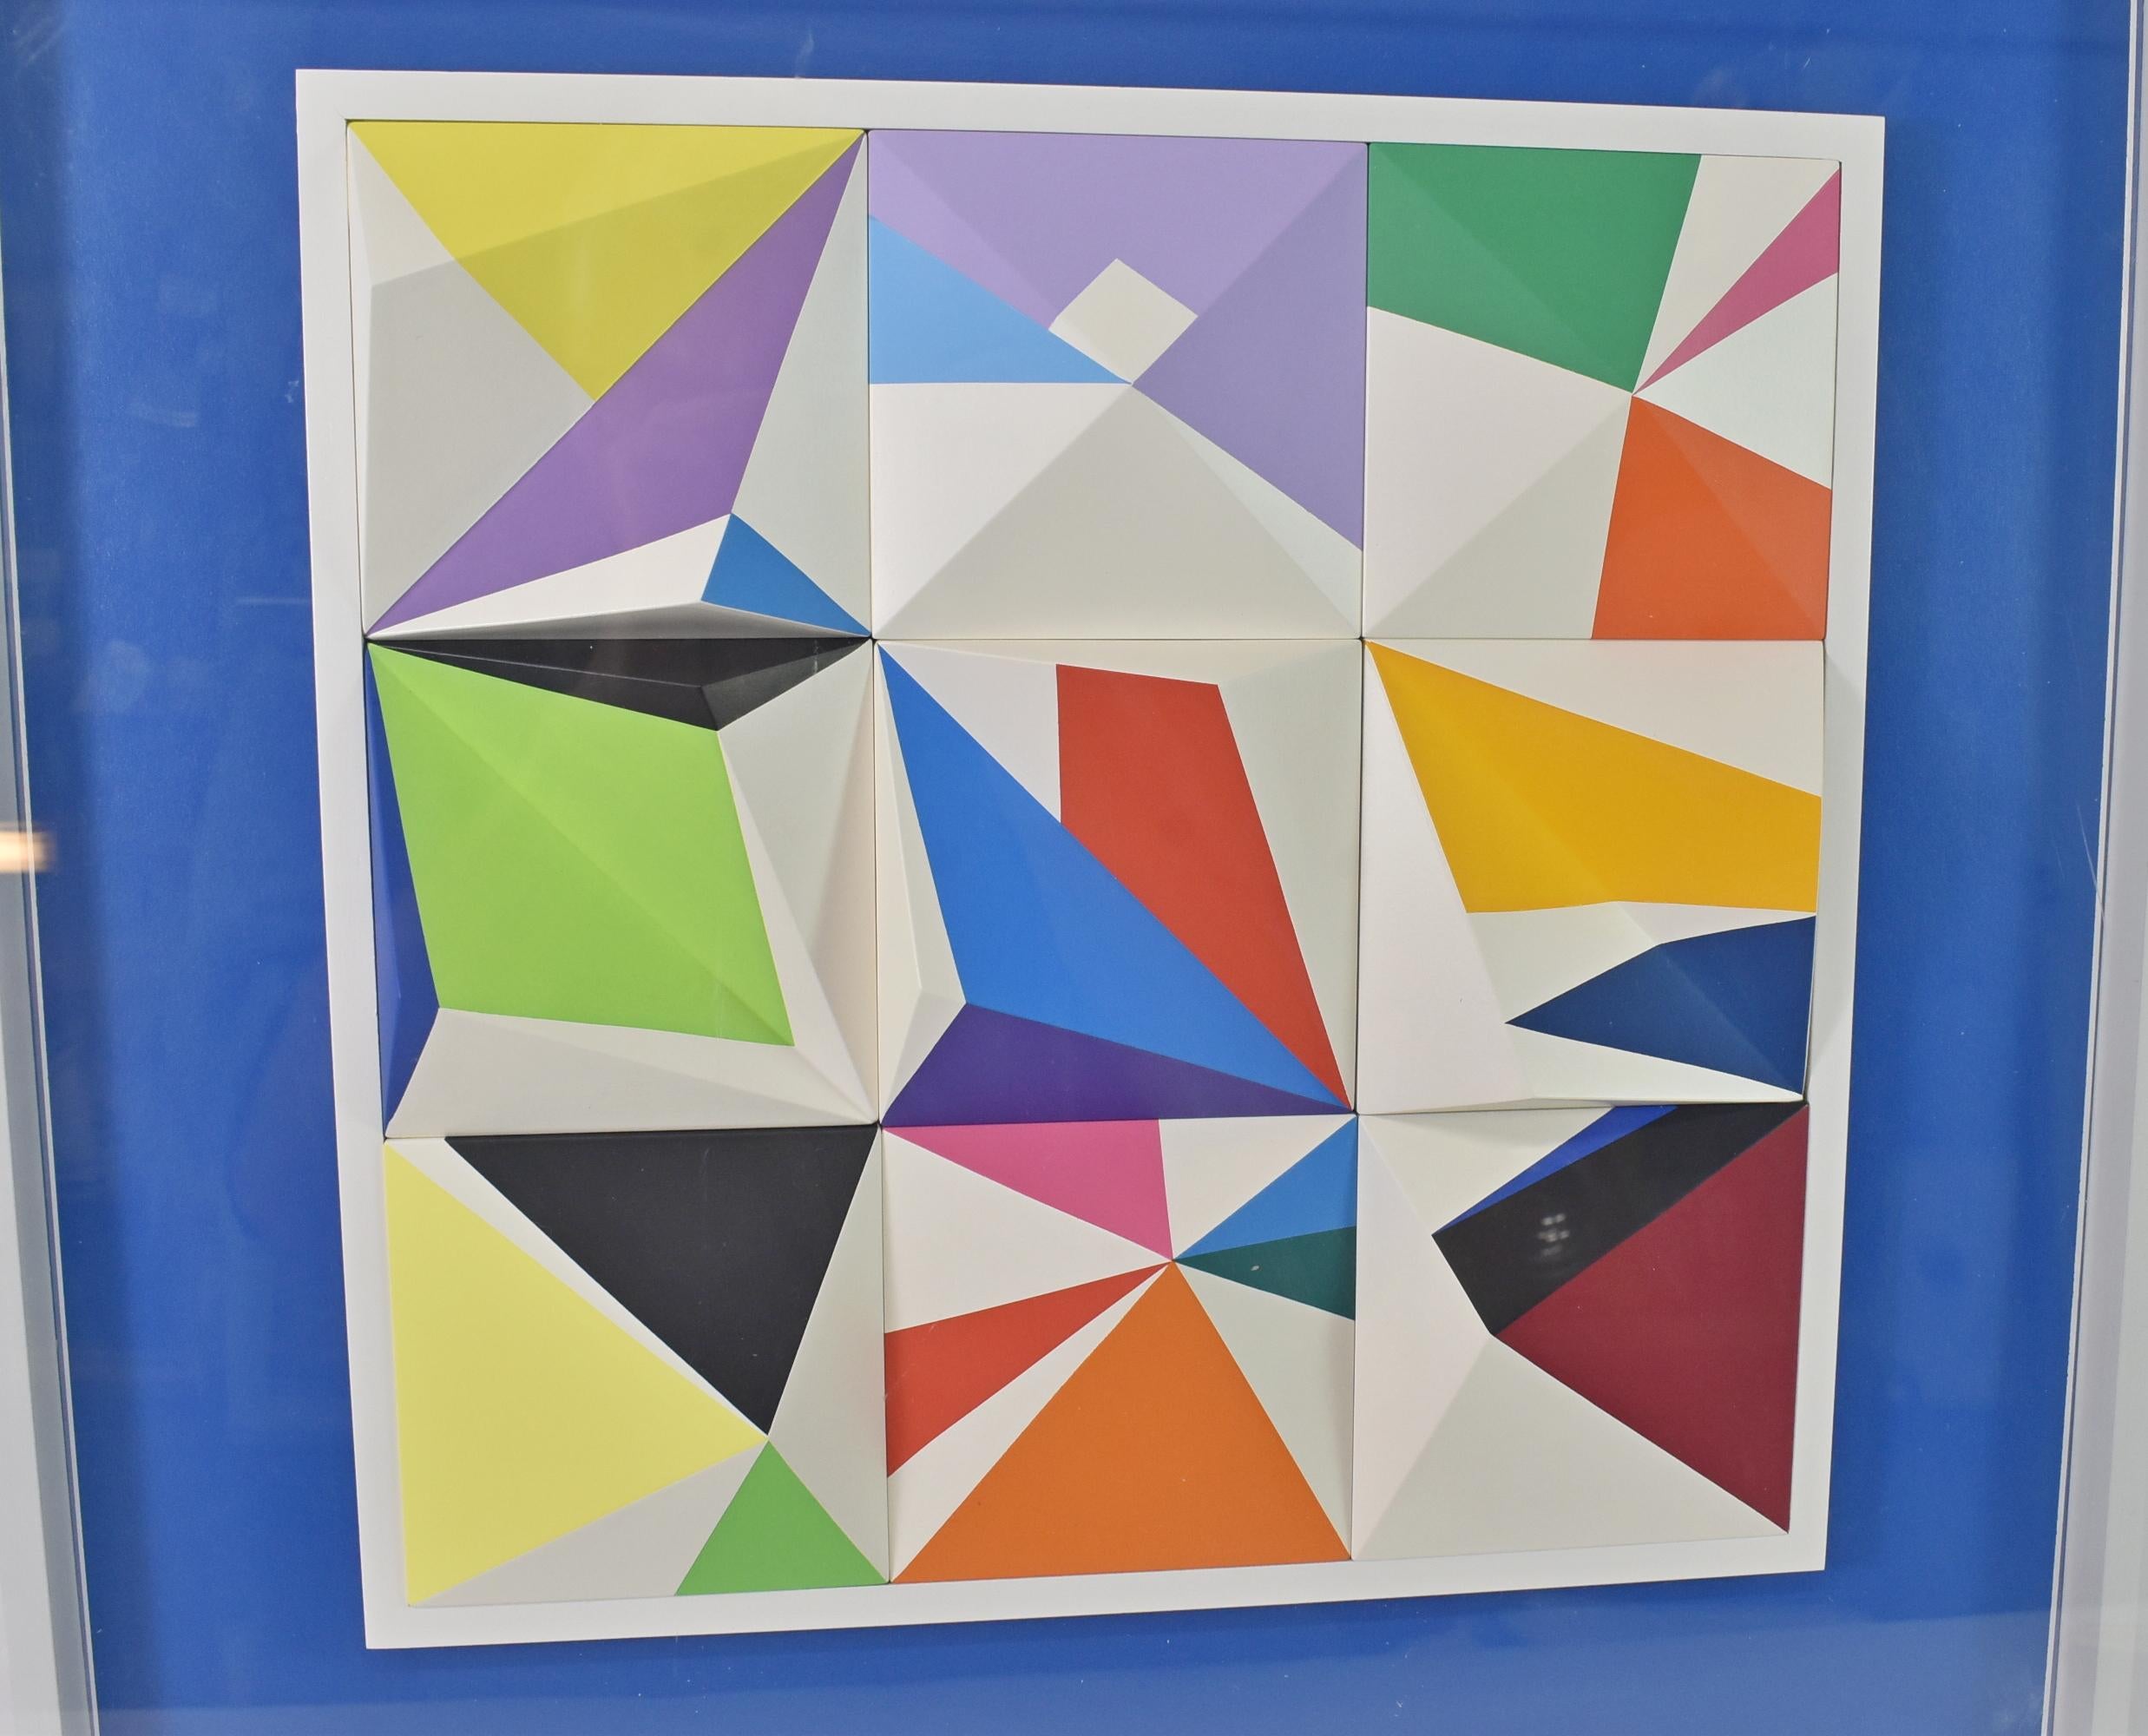 Yaacov Agam, Andromeda 1985, Color Screen Print on 3-dimensional PVC. Modular spacegraph of 3-dimensonial work on folded PVC pyramidal forms with color screen print work mounted on a blue background. From an edition of 99 in a removable acrylic